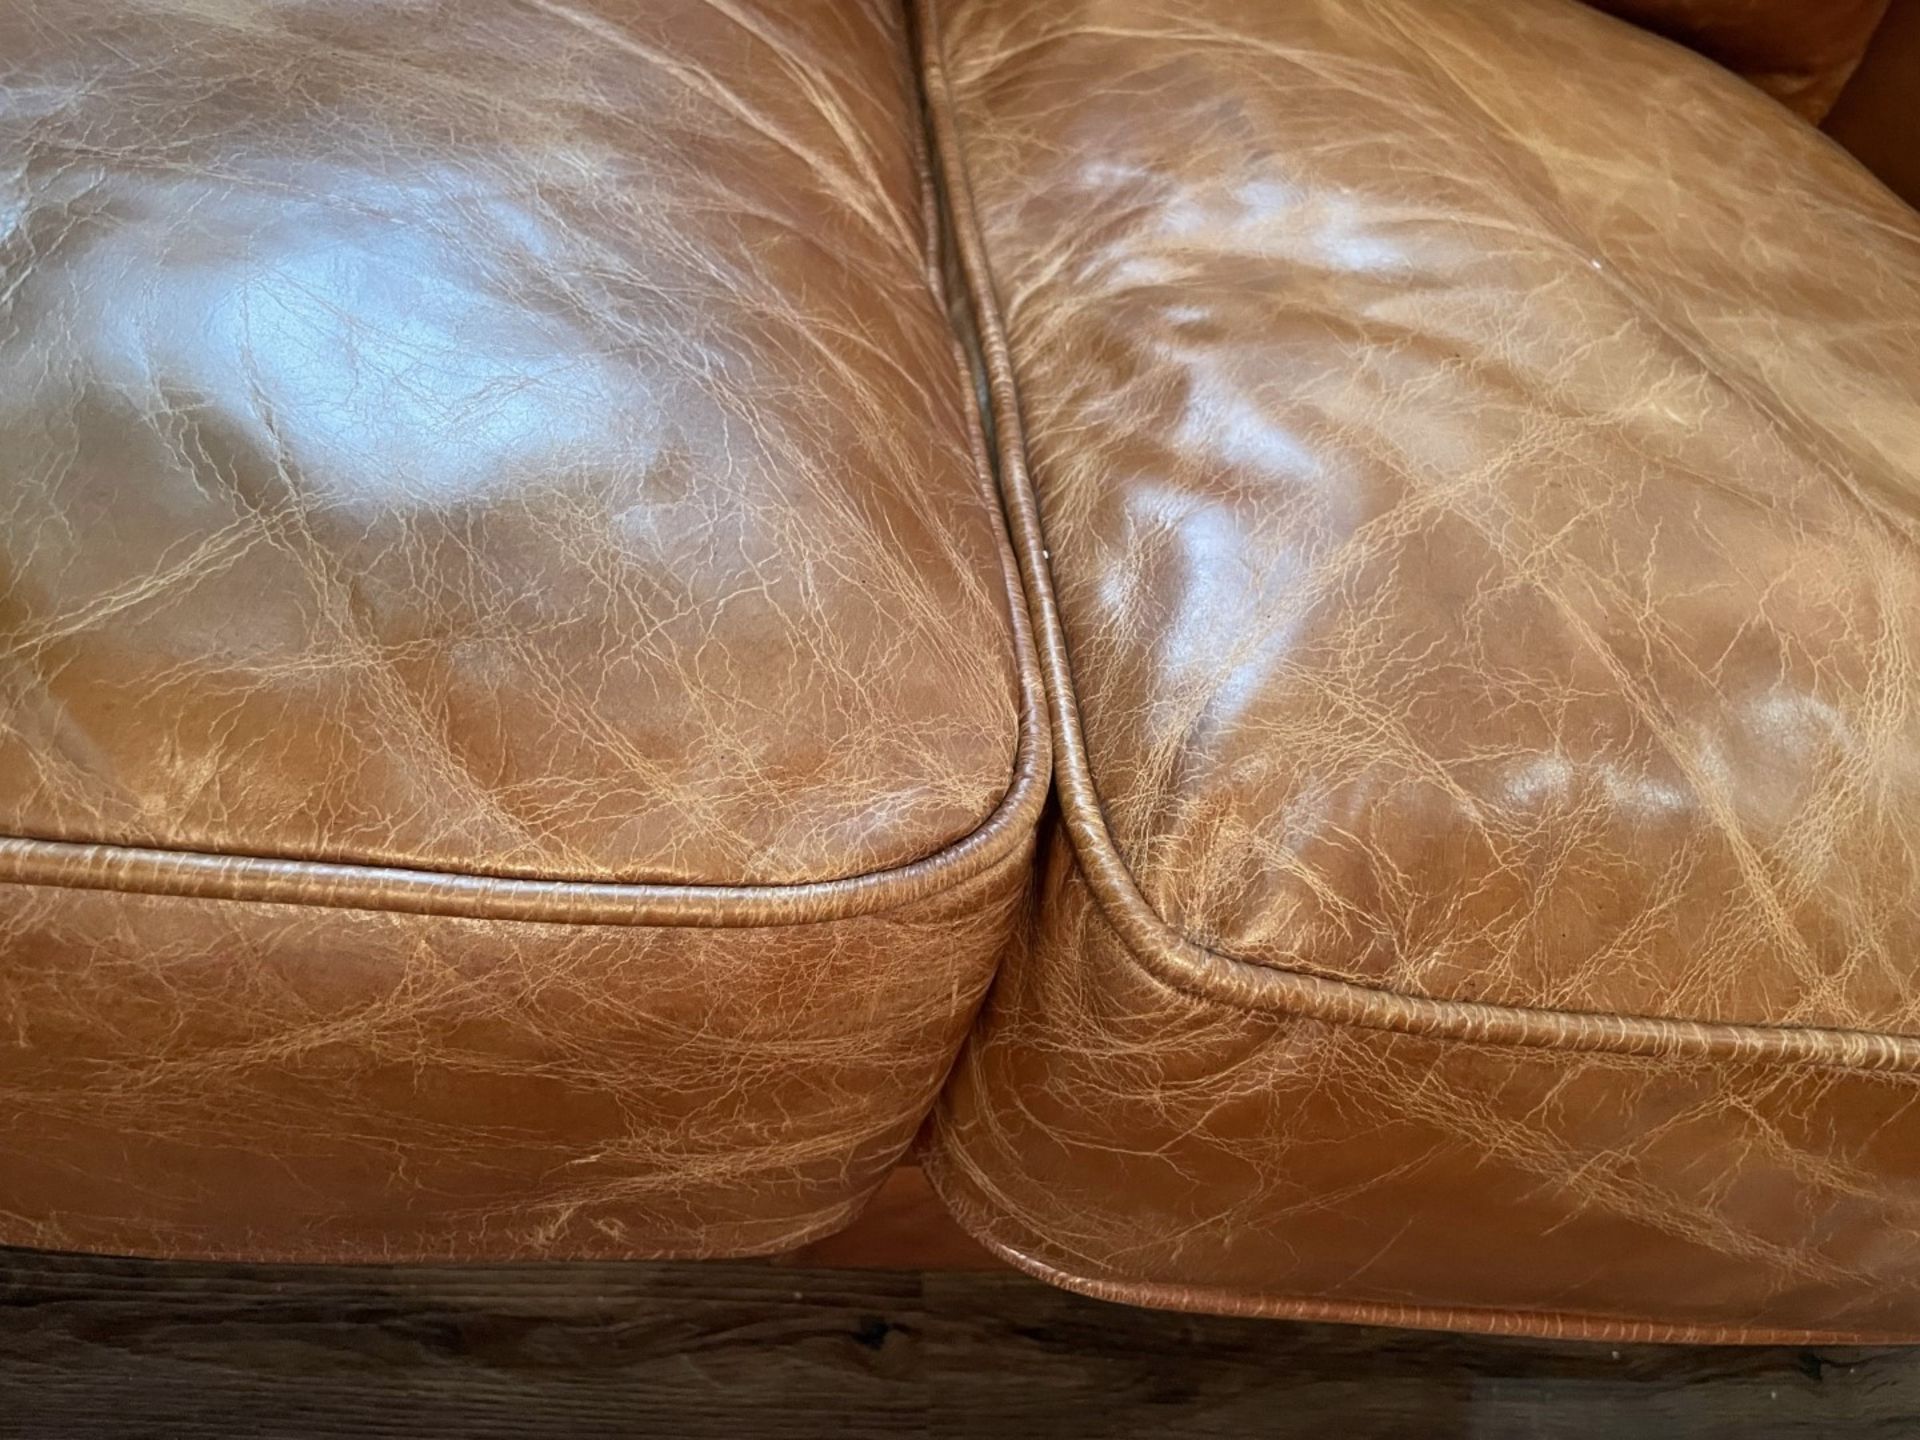 1 x Carlton Vintage Tan Leather Upholstered 2-Seater Sofa - Recently Removed from a Luxury Furniture - Image 4 of 8